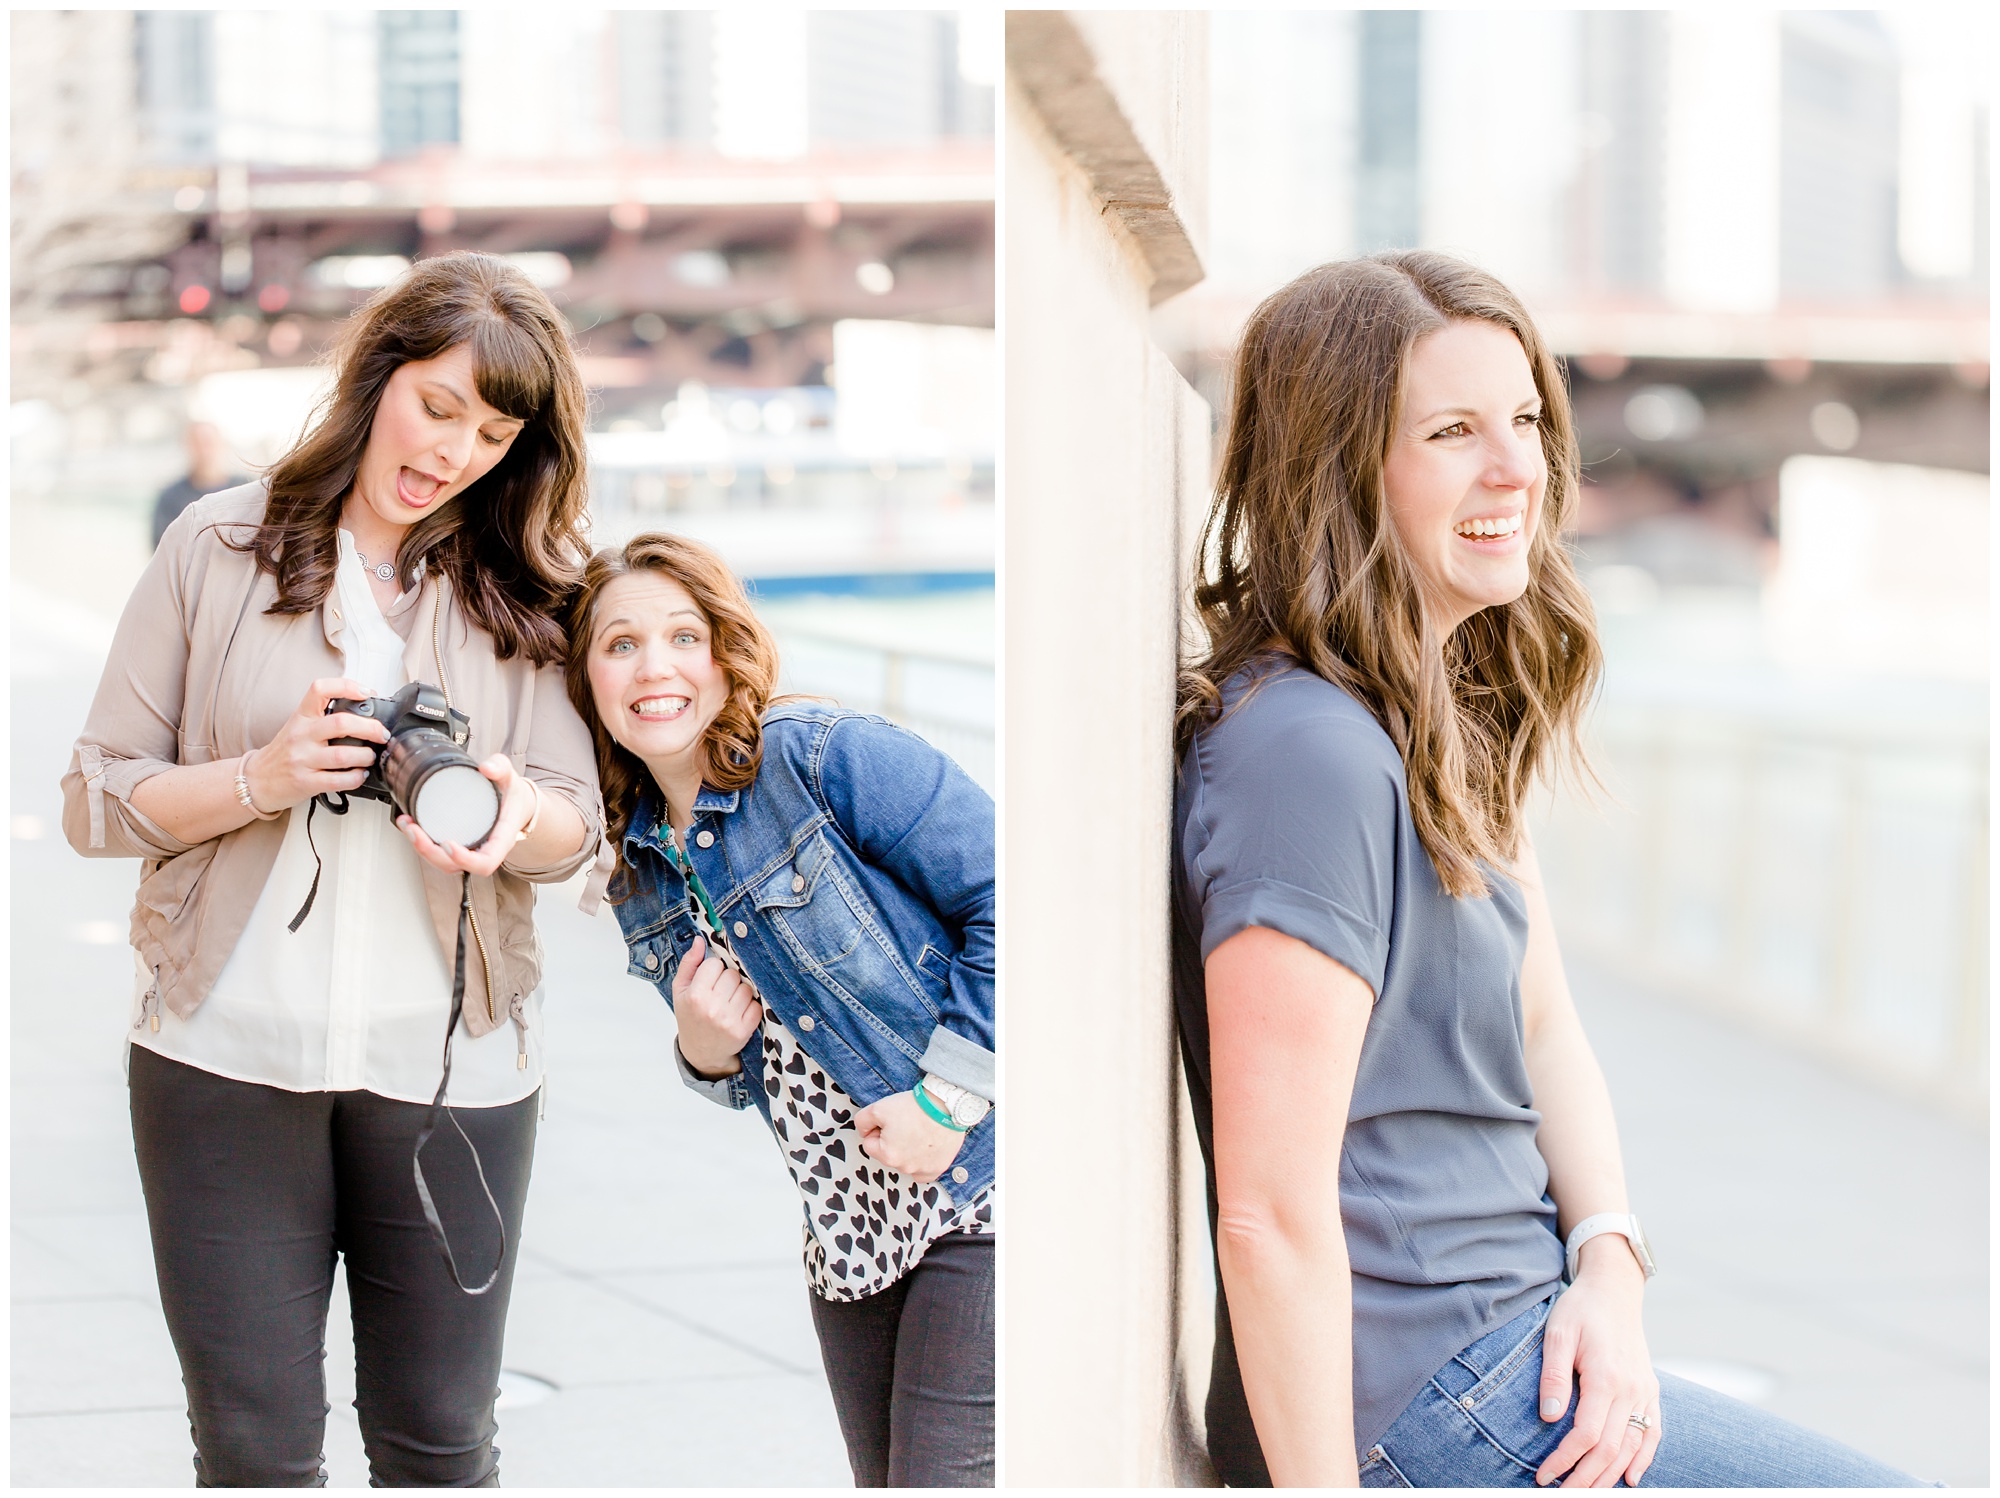 You Know You're a Photographer When... | St. Louis Wedding Photographer